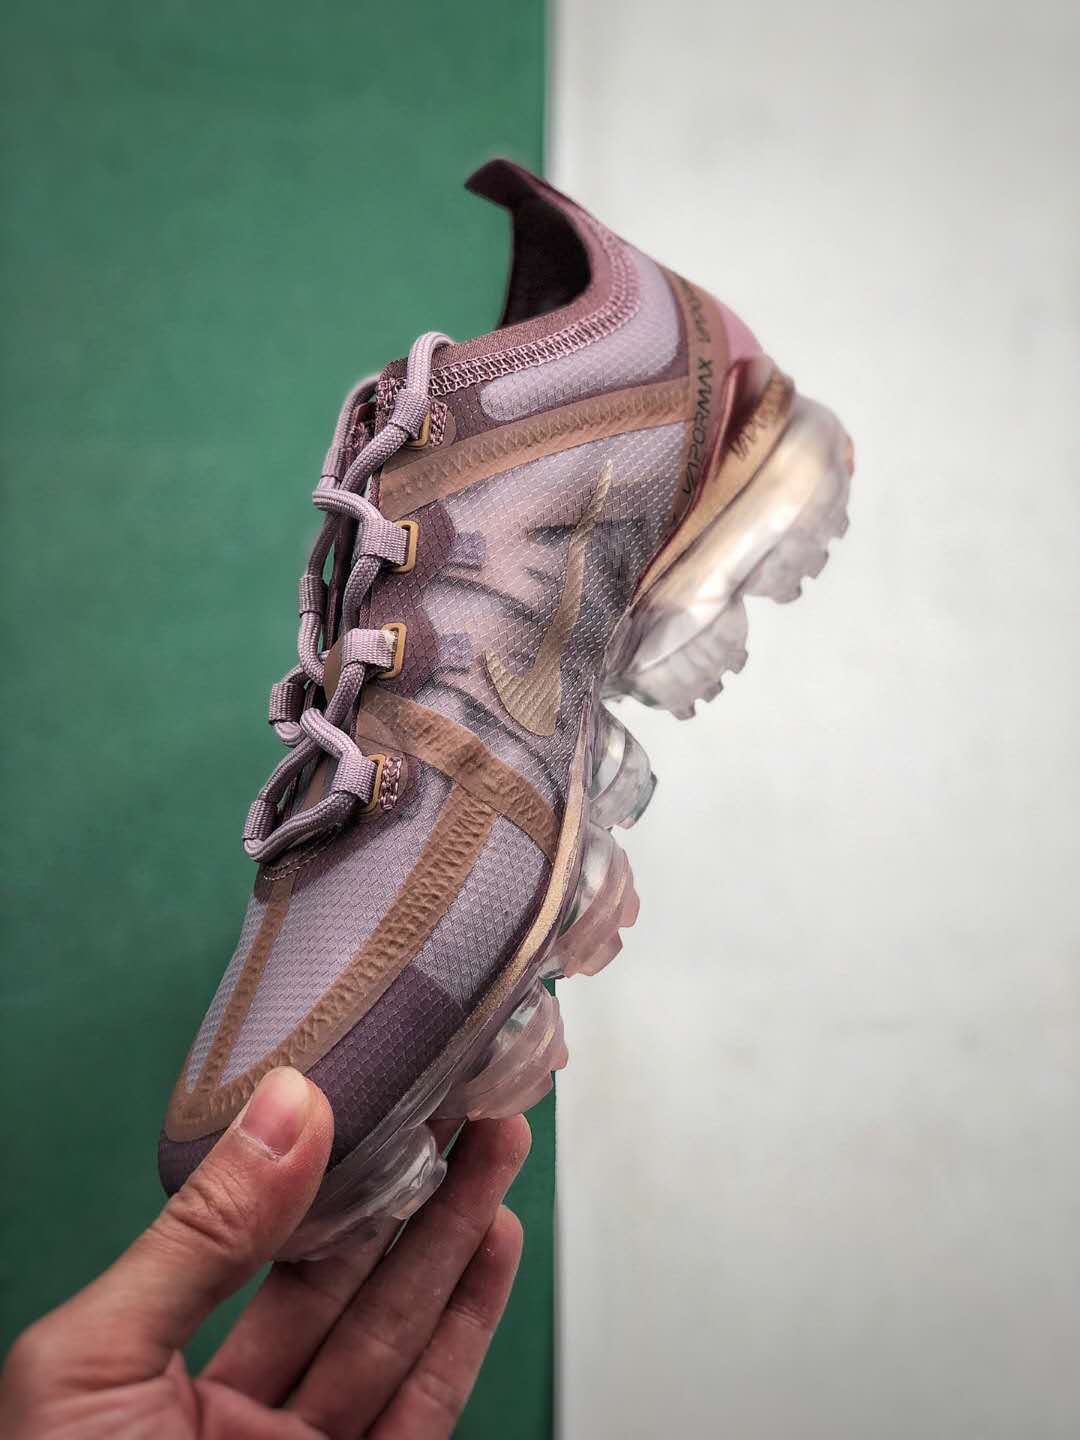 Nike Air VaporMax 2019 'Soft Pink' AR6632-500 - Lightweight and Stylish Footwear for Women | Limited Edition